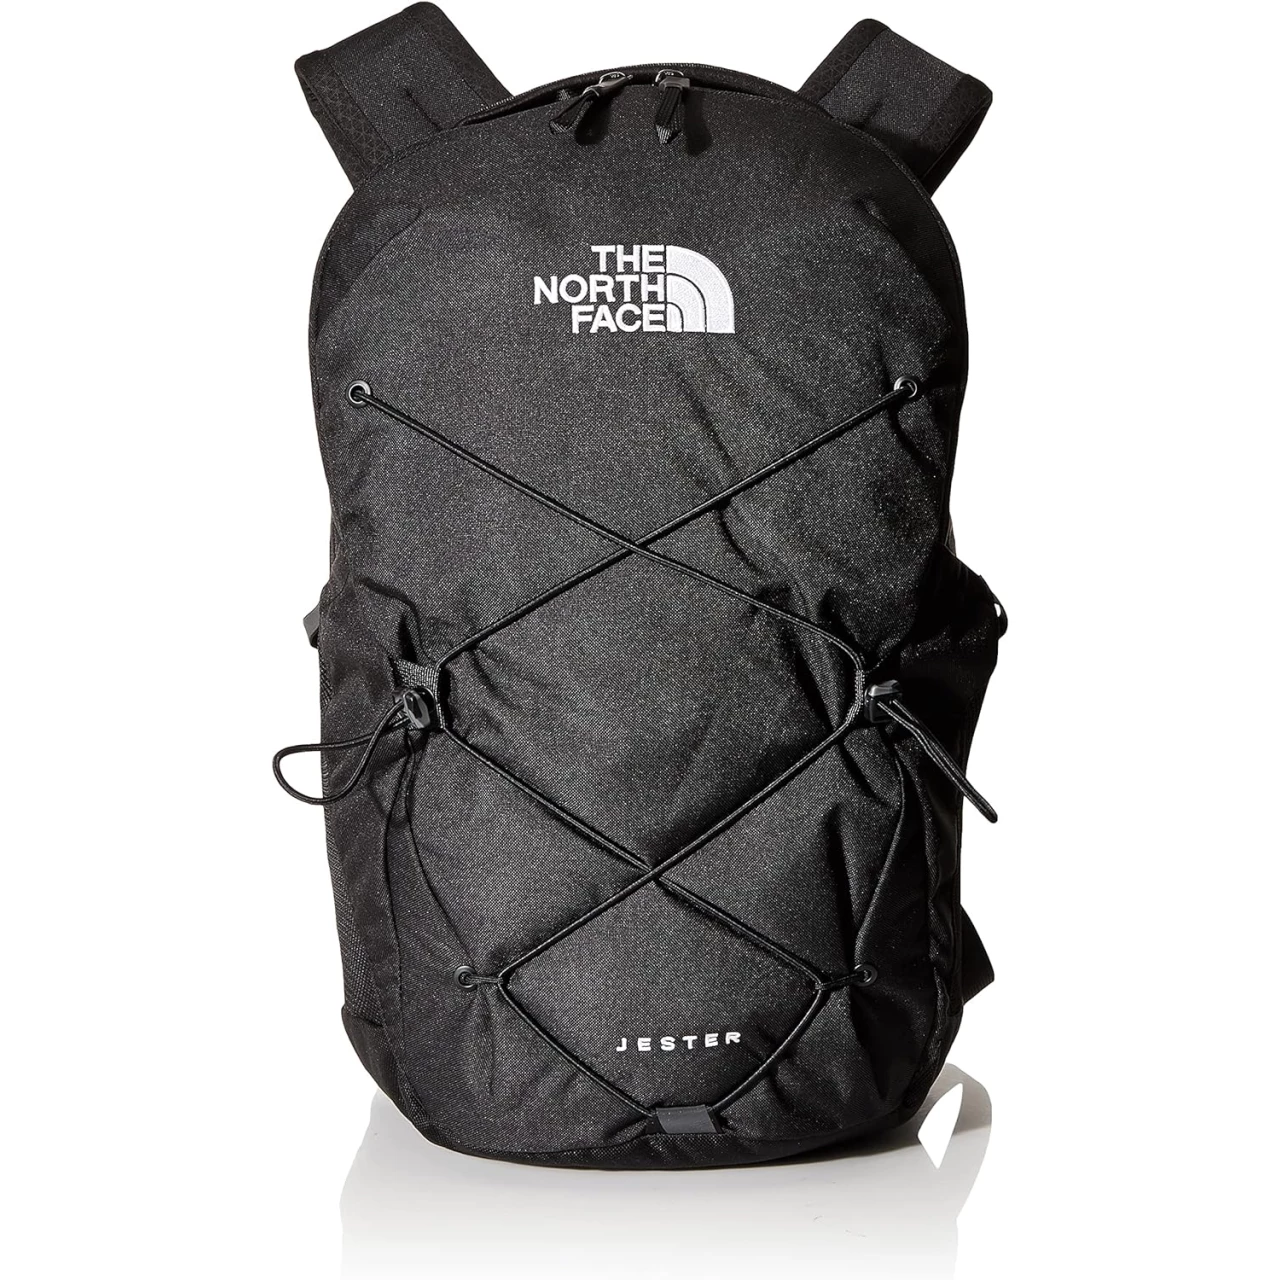 THE NORTH FACE Jester Commuter Laptop Backpack, TNF Black 2, One Size